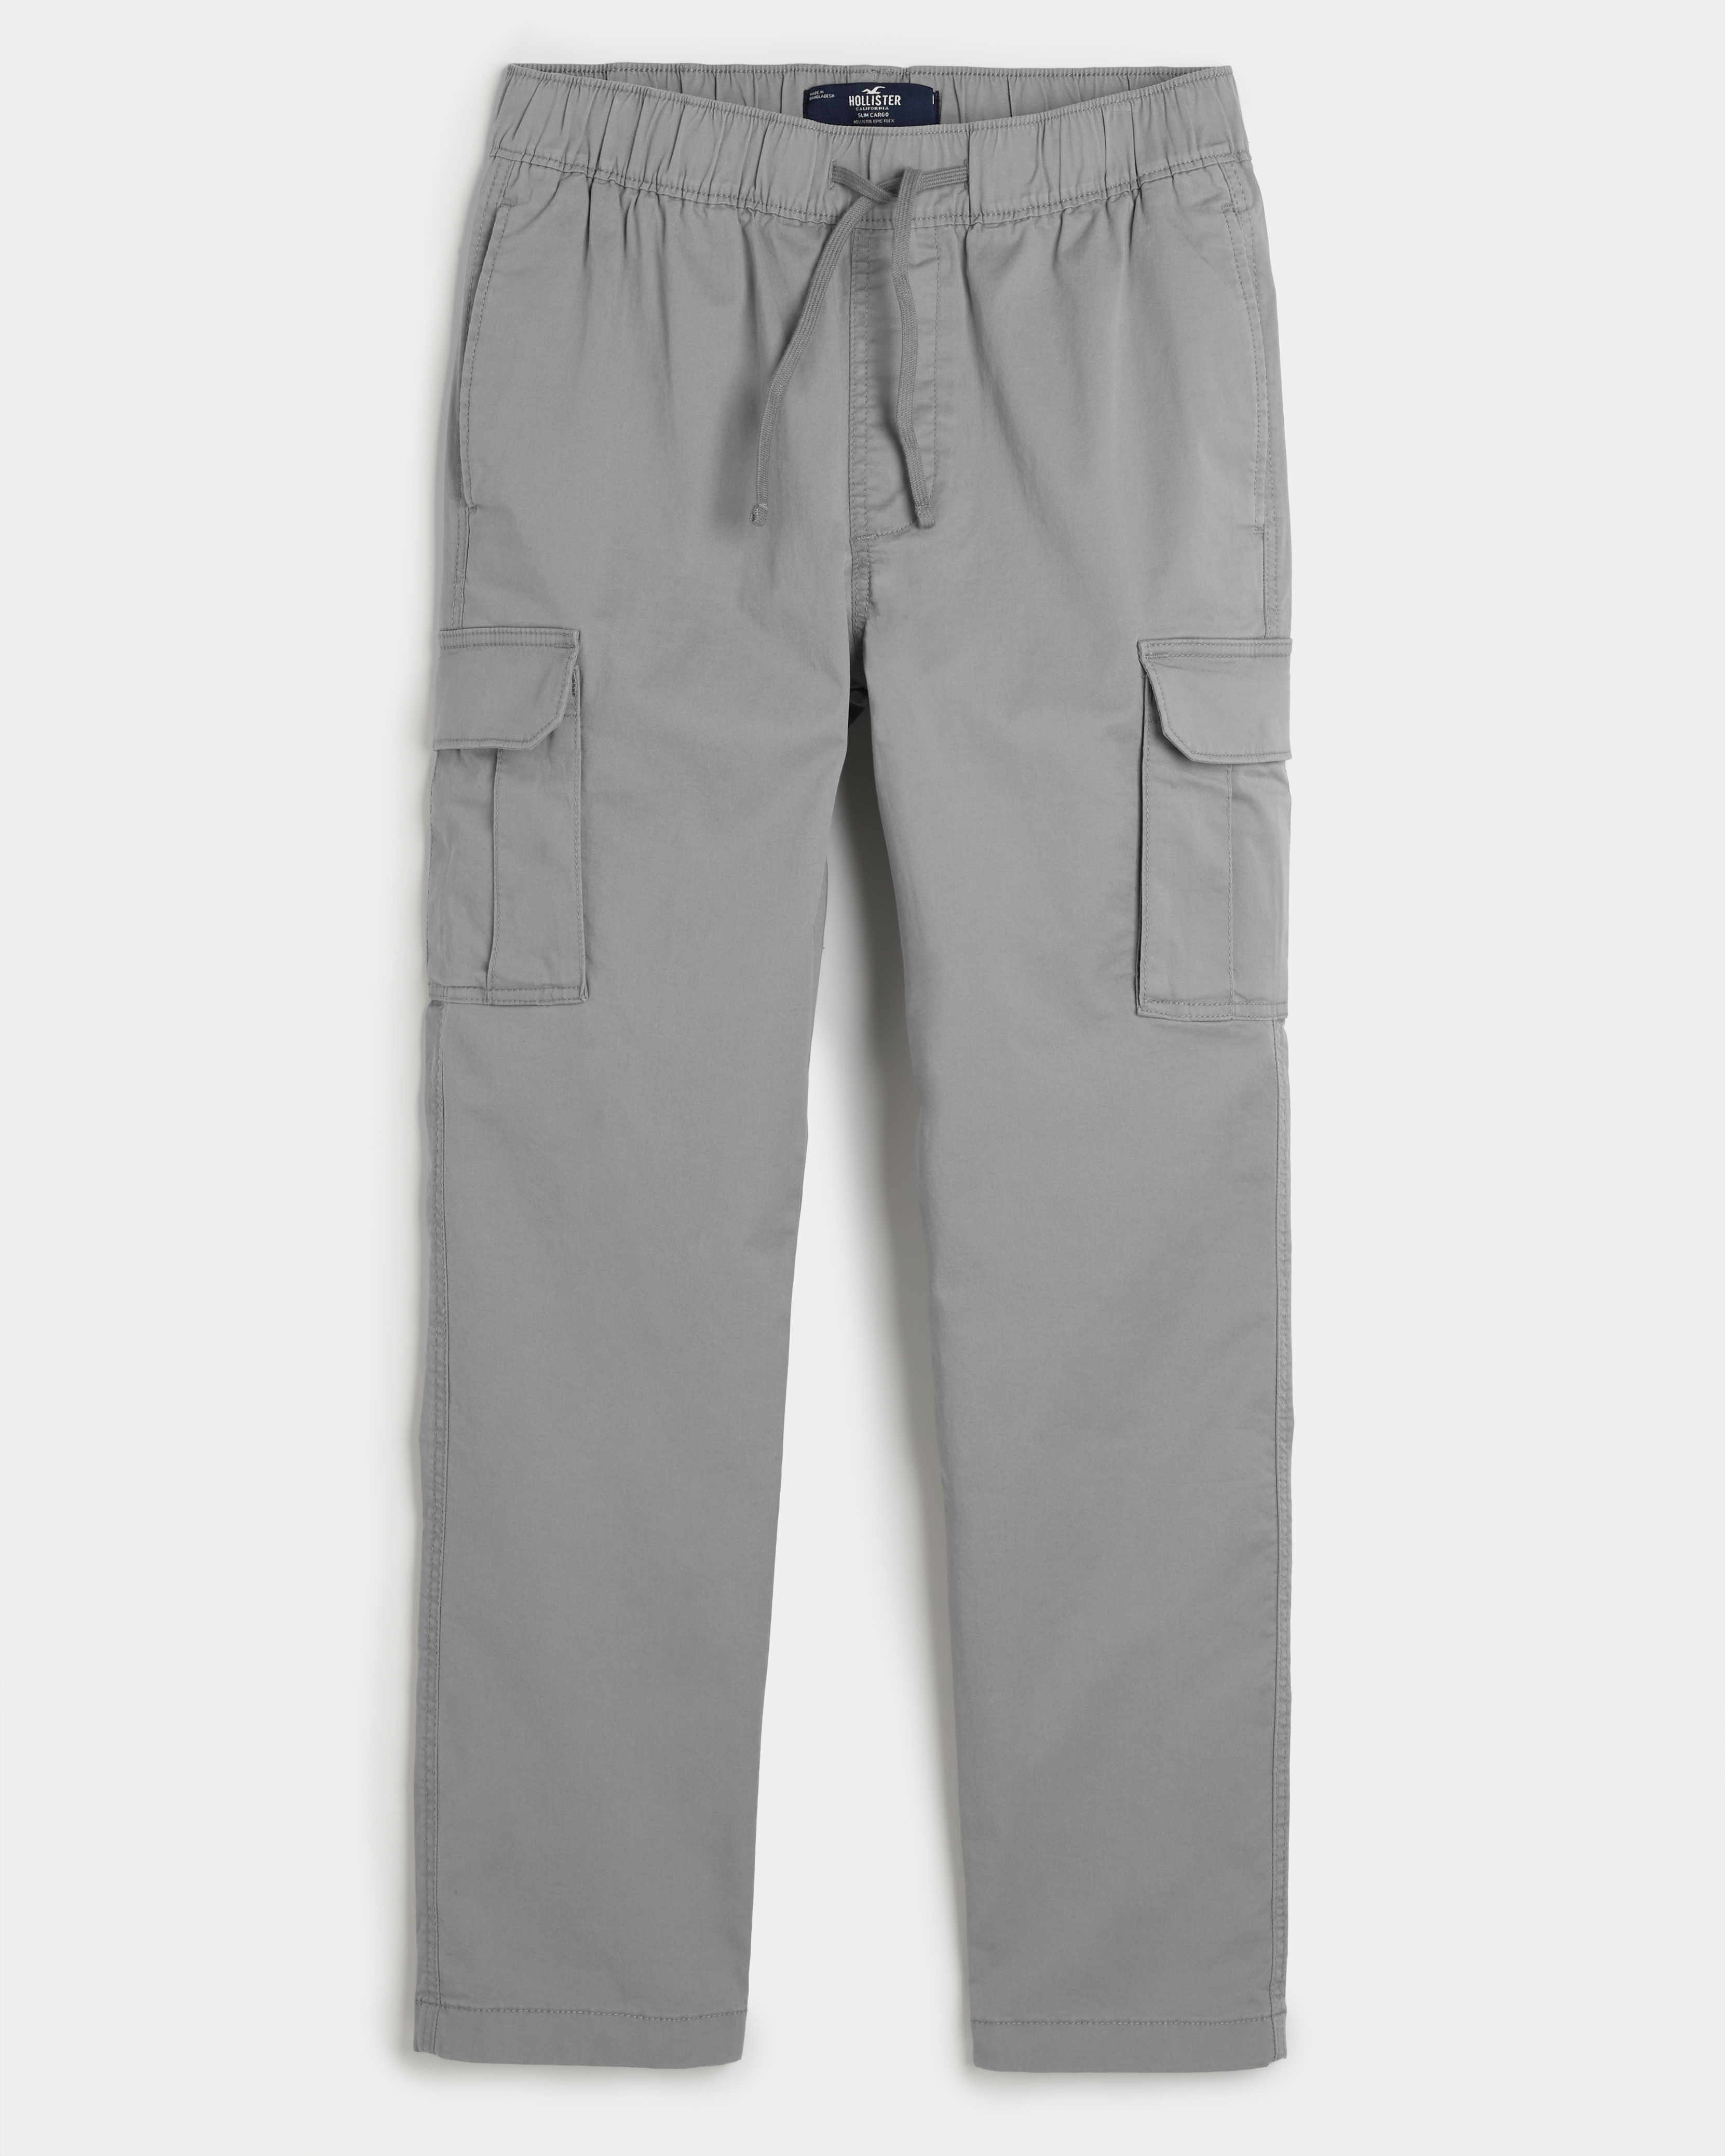 Men's Slim Cargo Pull-On Pants | Men's Up To 50% Off Select Styles